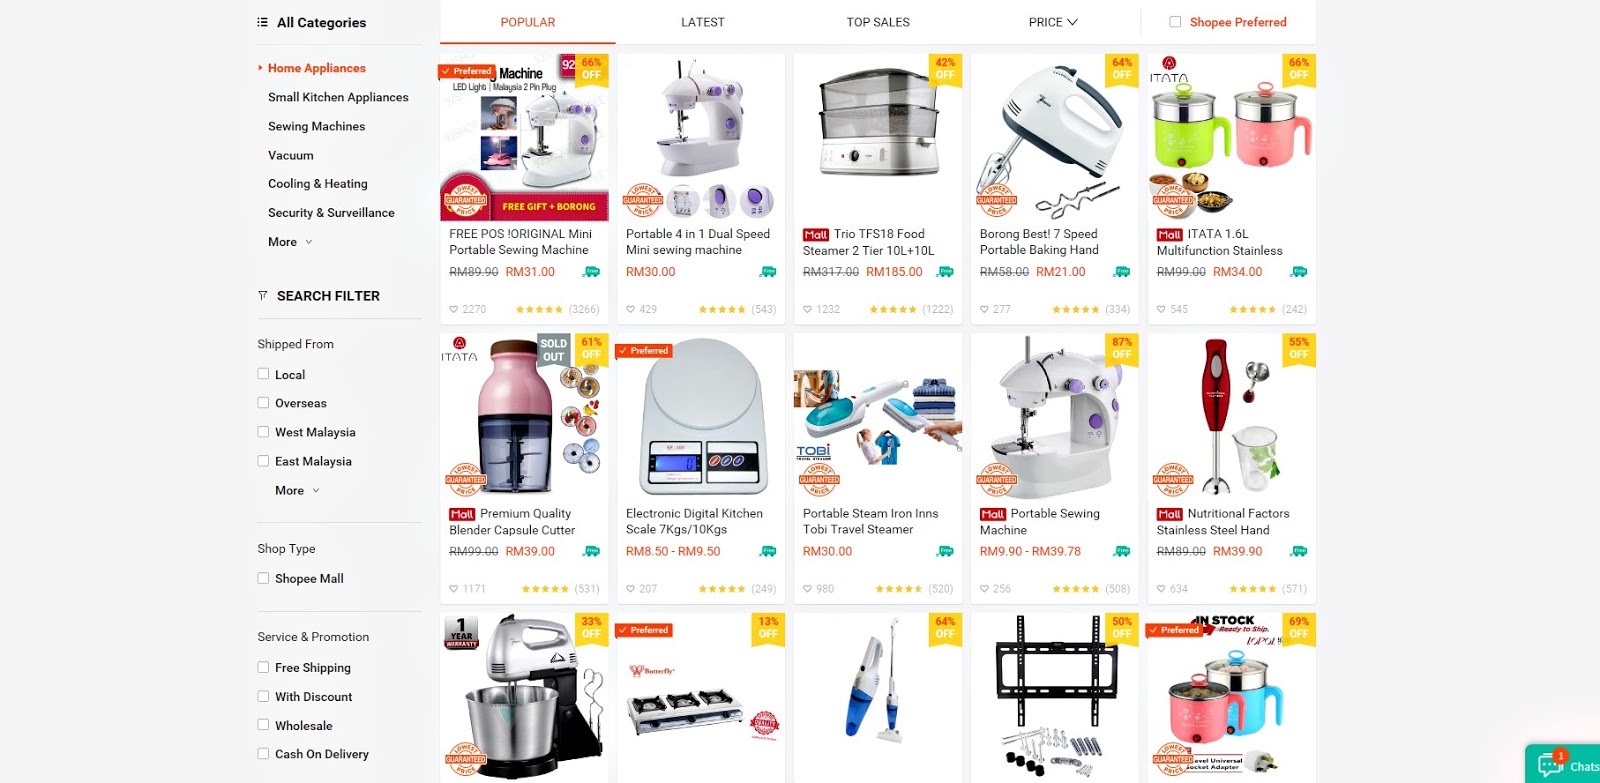  Shopee  Malaysia  The Best Shopping Online Platform In 